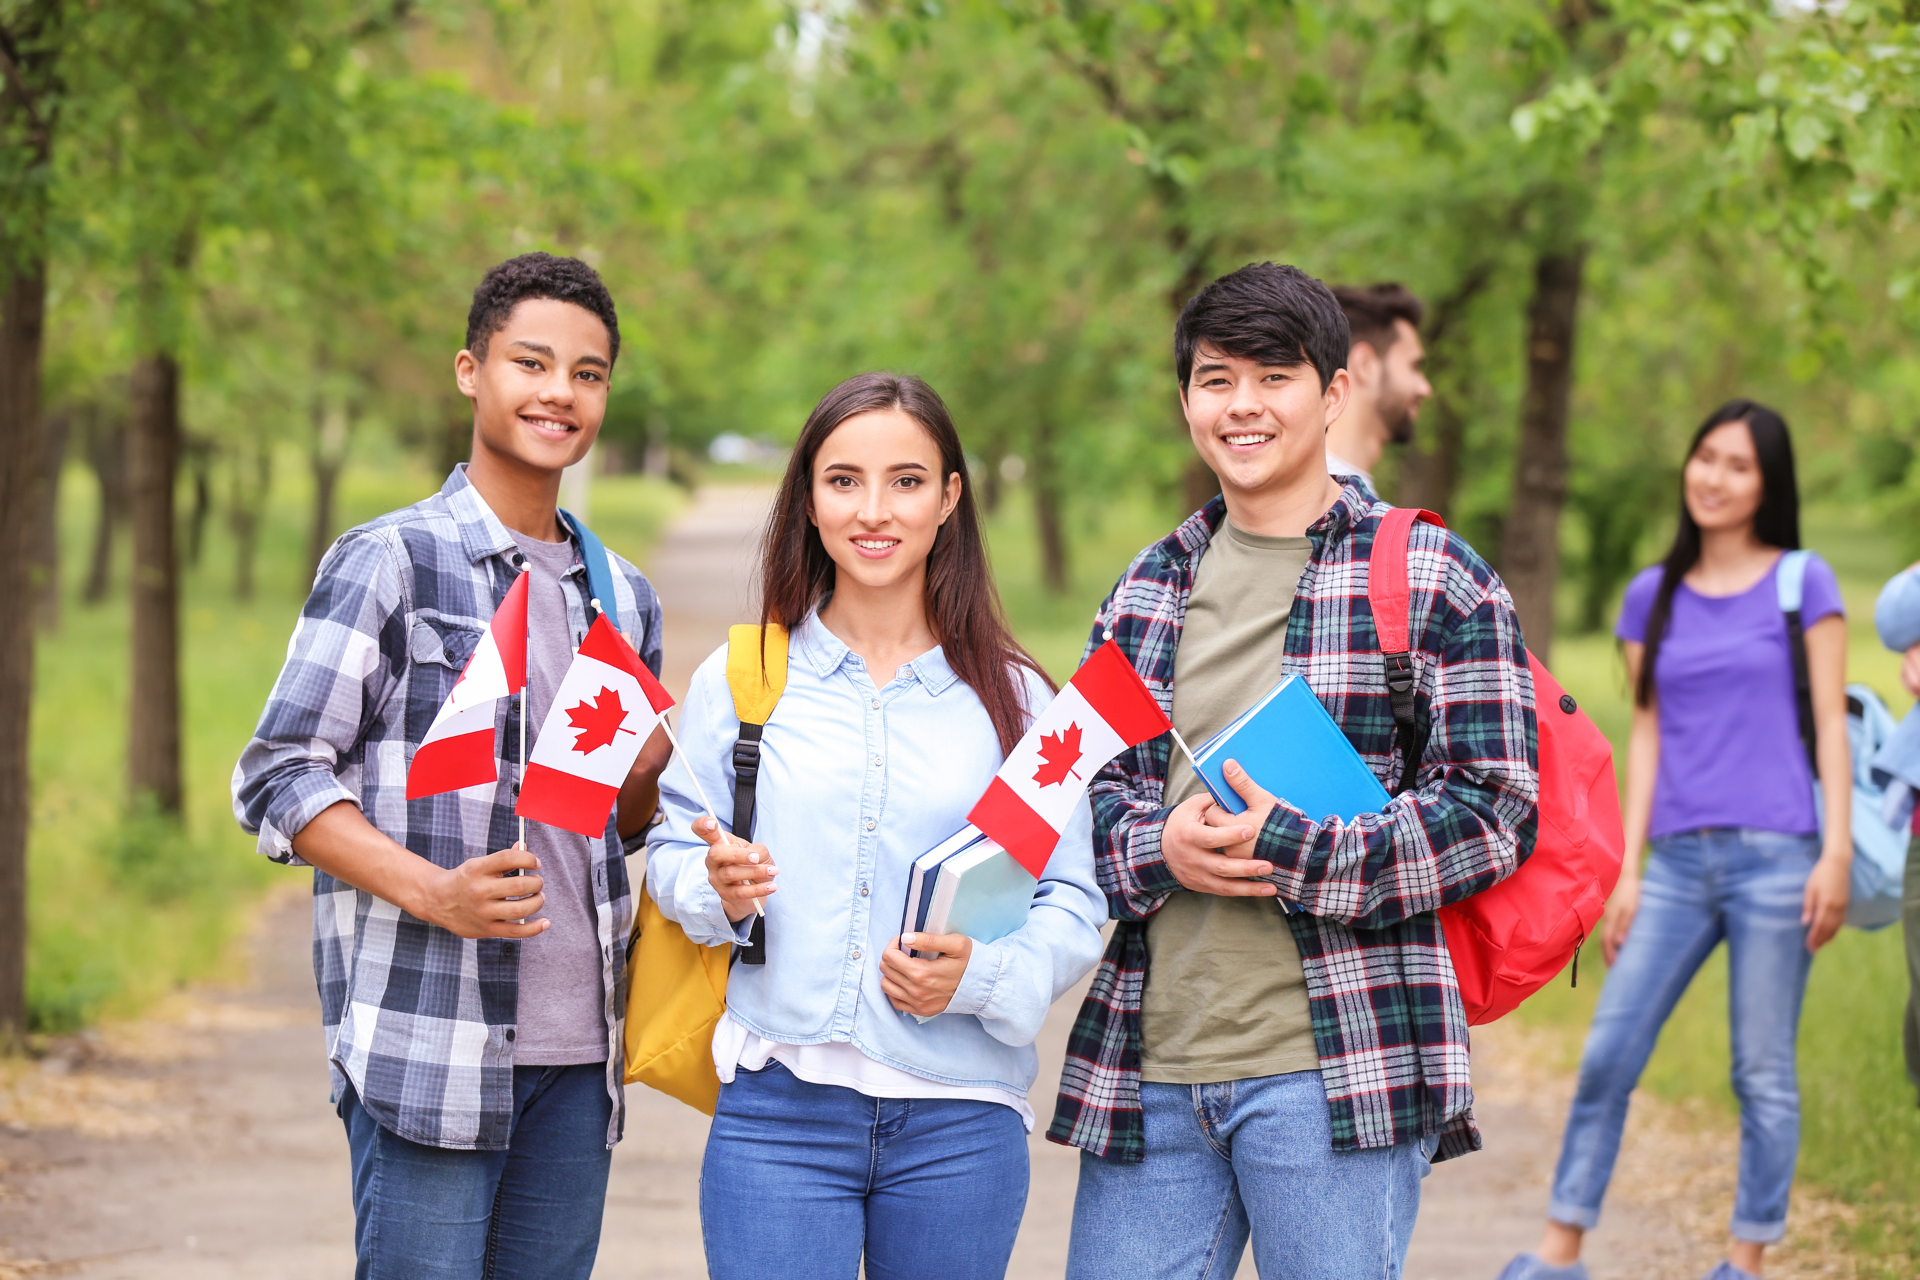 Canada colleges,colleges in Canada,university in Canada,Canada colleges,universities in Canada,colleges in Canada,top universities in Canada,universities of Canada,admissions in Canada,university courses in Canada,academic requirements to study in canada,after 10th study in canada,after 12th study in canada,aviation study in canada,best cities to study in canada, best cities to study in canada,best course to study in canada,best course to study in canada for pr,best courses to study for jobs in canada 